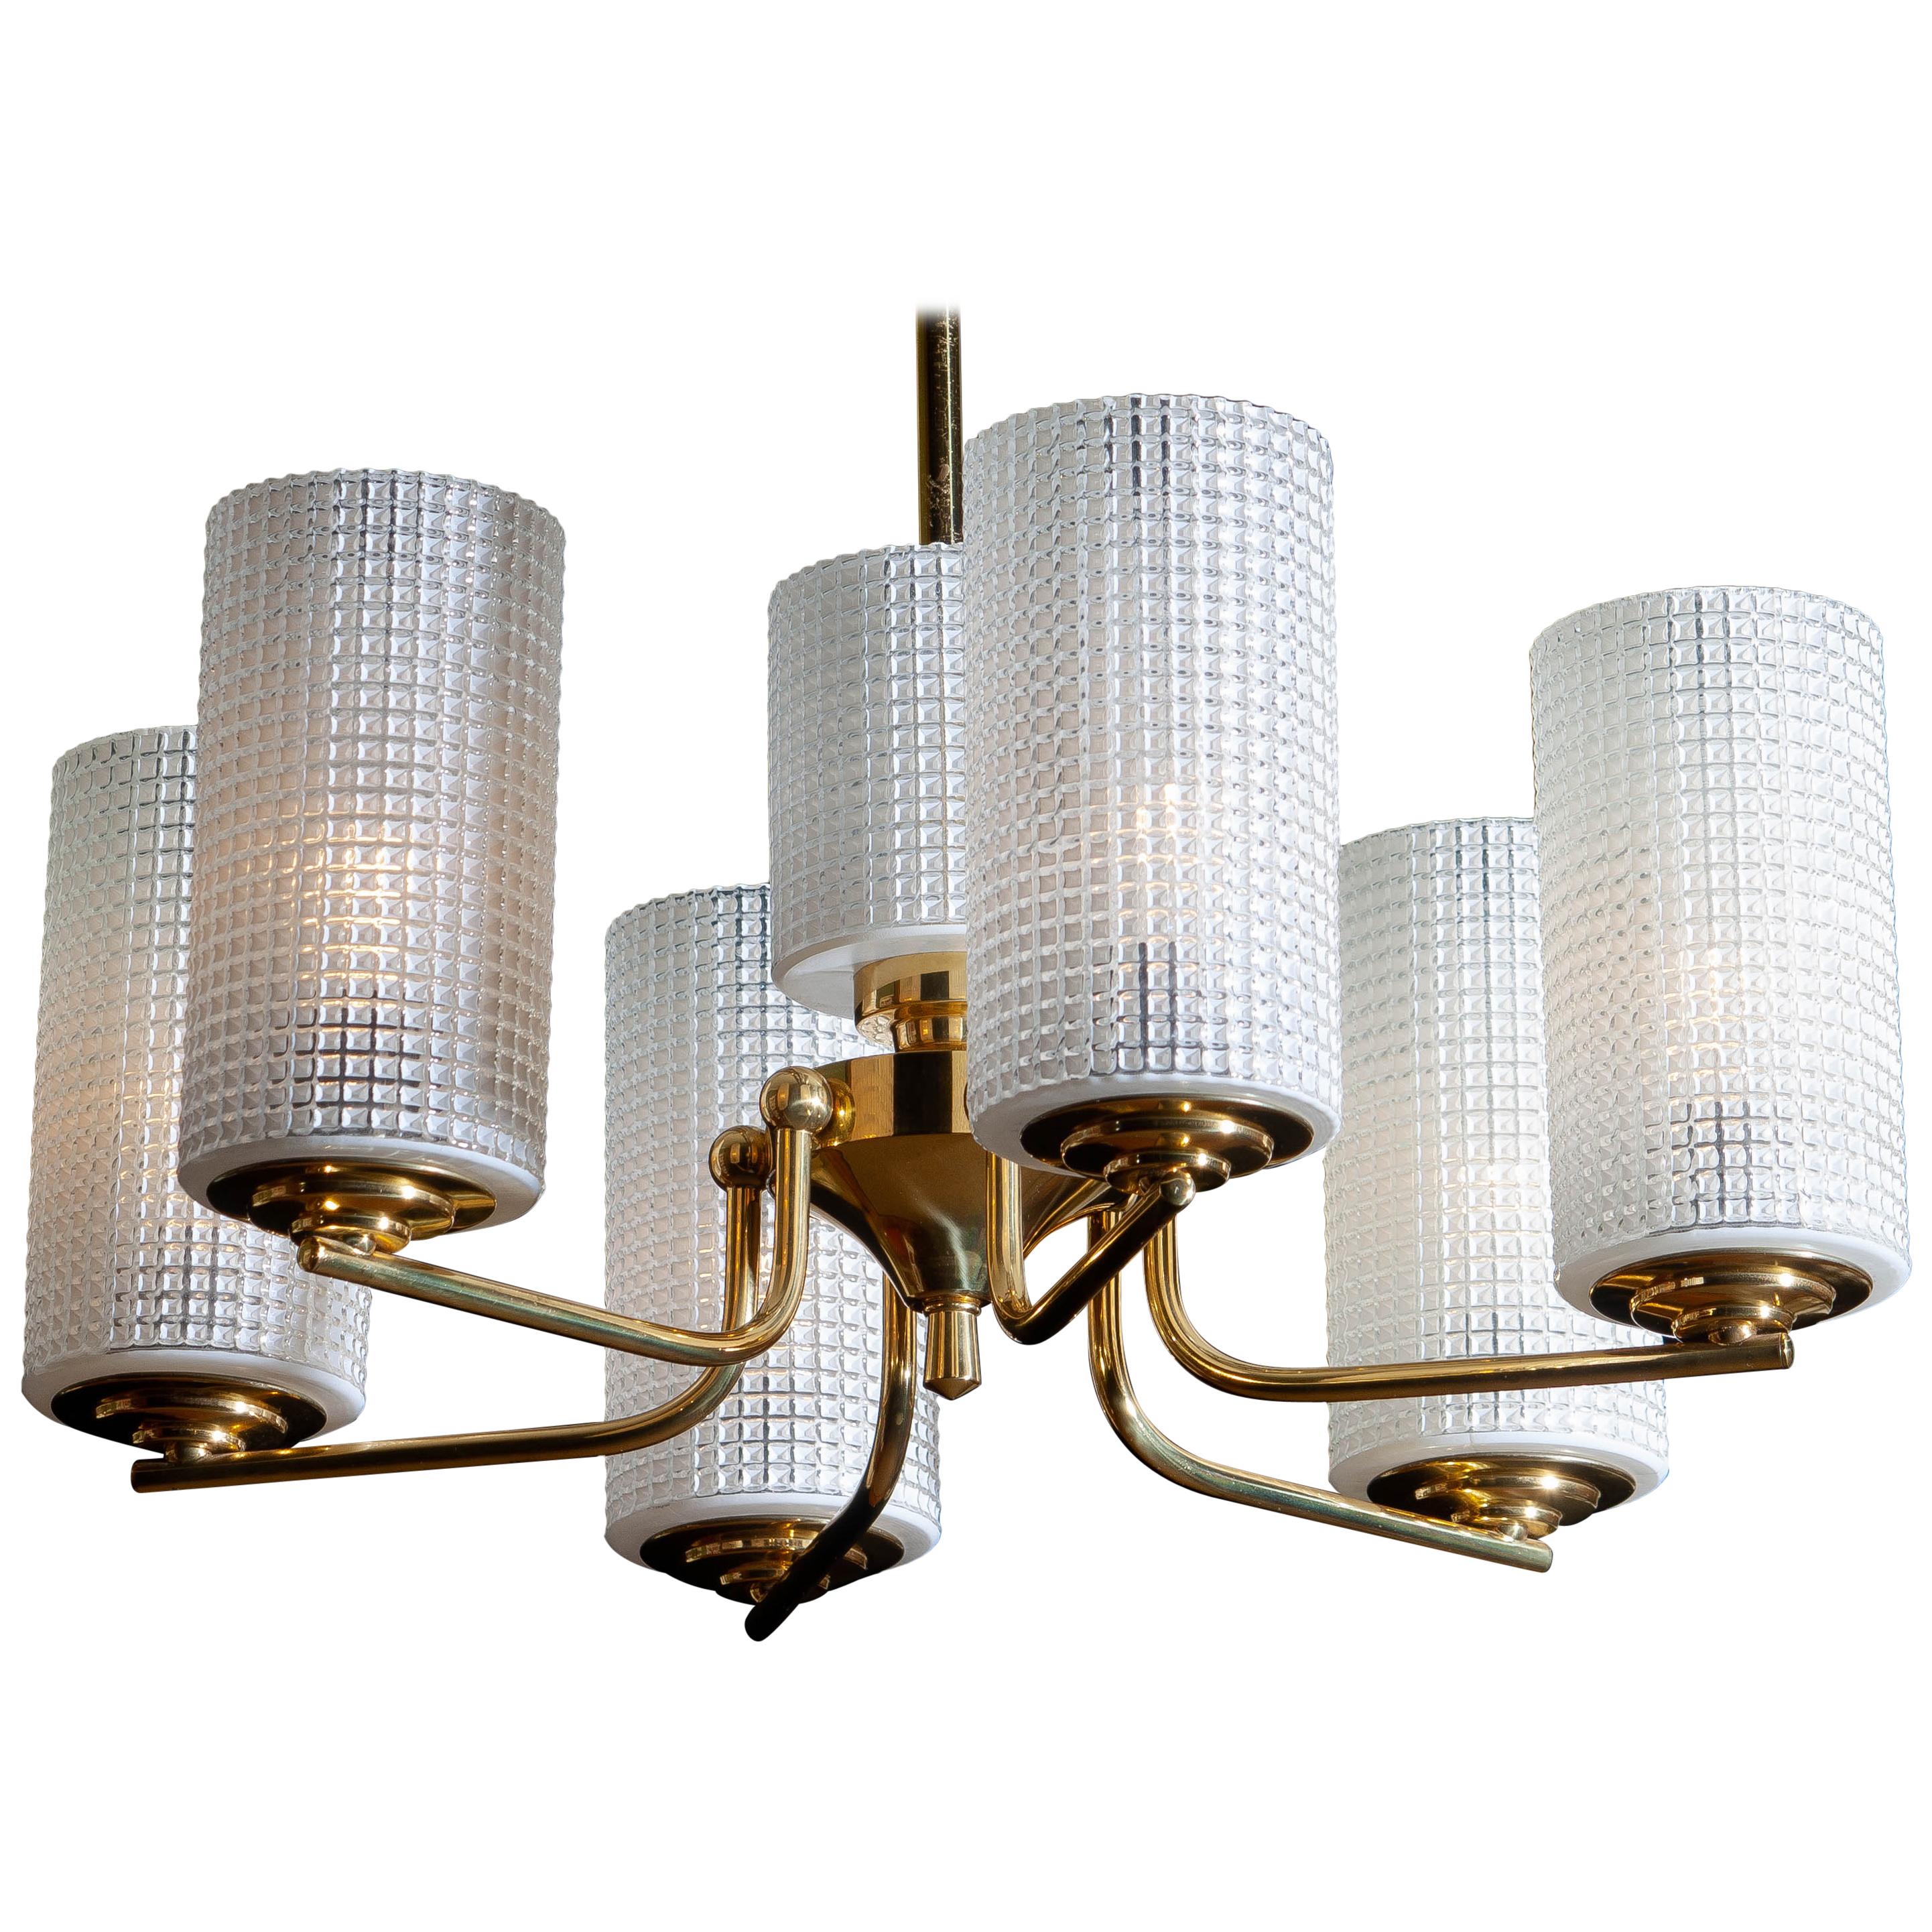 1960s, beautiful and excellent brass chandelier designed by Carl Fagerlund for Orrefors, Sweden.
The six glass vases are 18cm / 7 inch high. The one in the middle is 11cm / 4.3 inch.
The overall condition is very good.
         